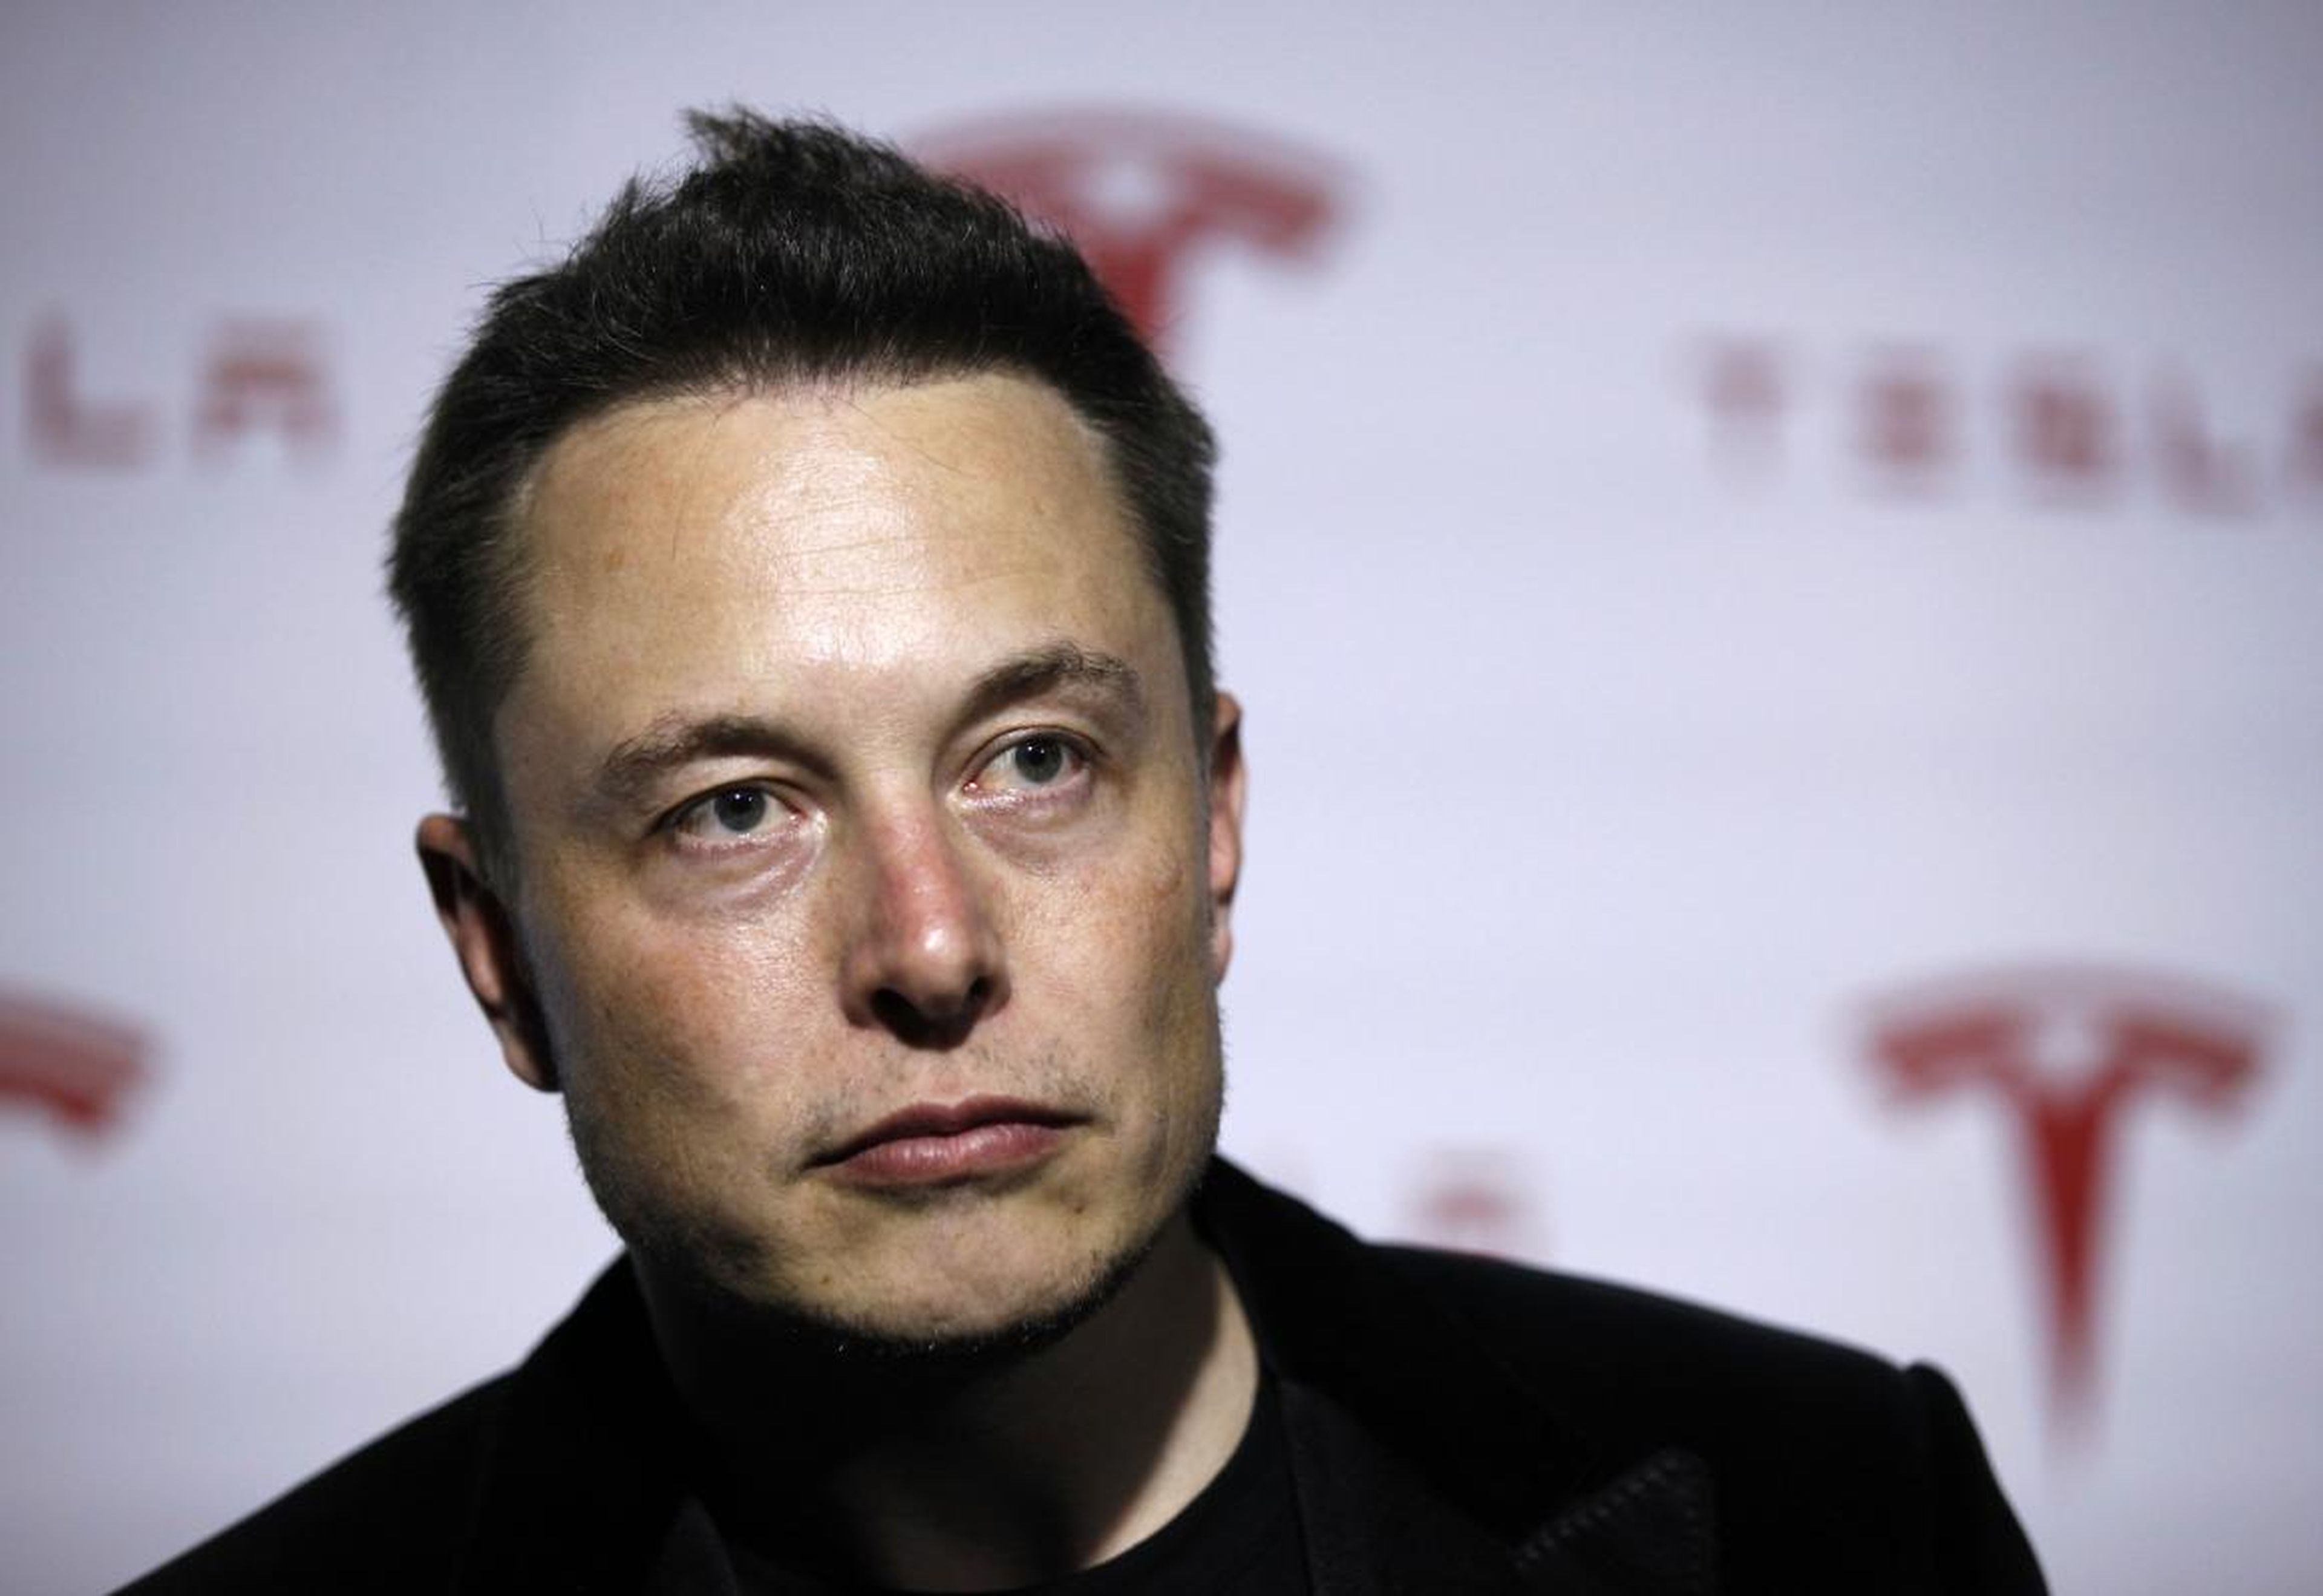 Elon Musk, CEO of Tesla, which has announced several cost-cutting moves recently.